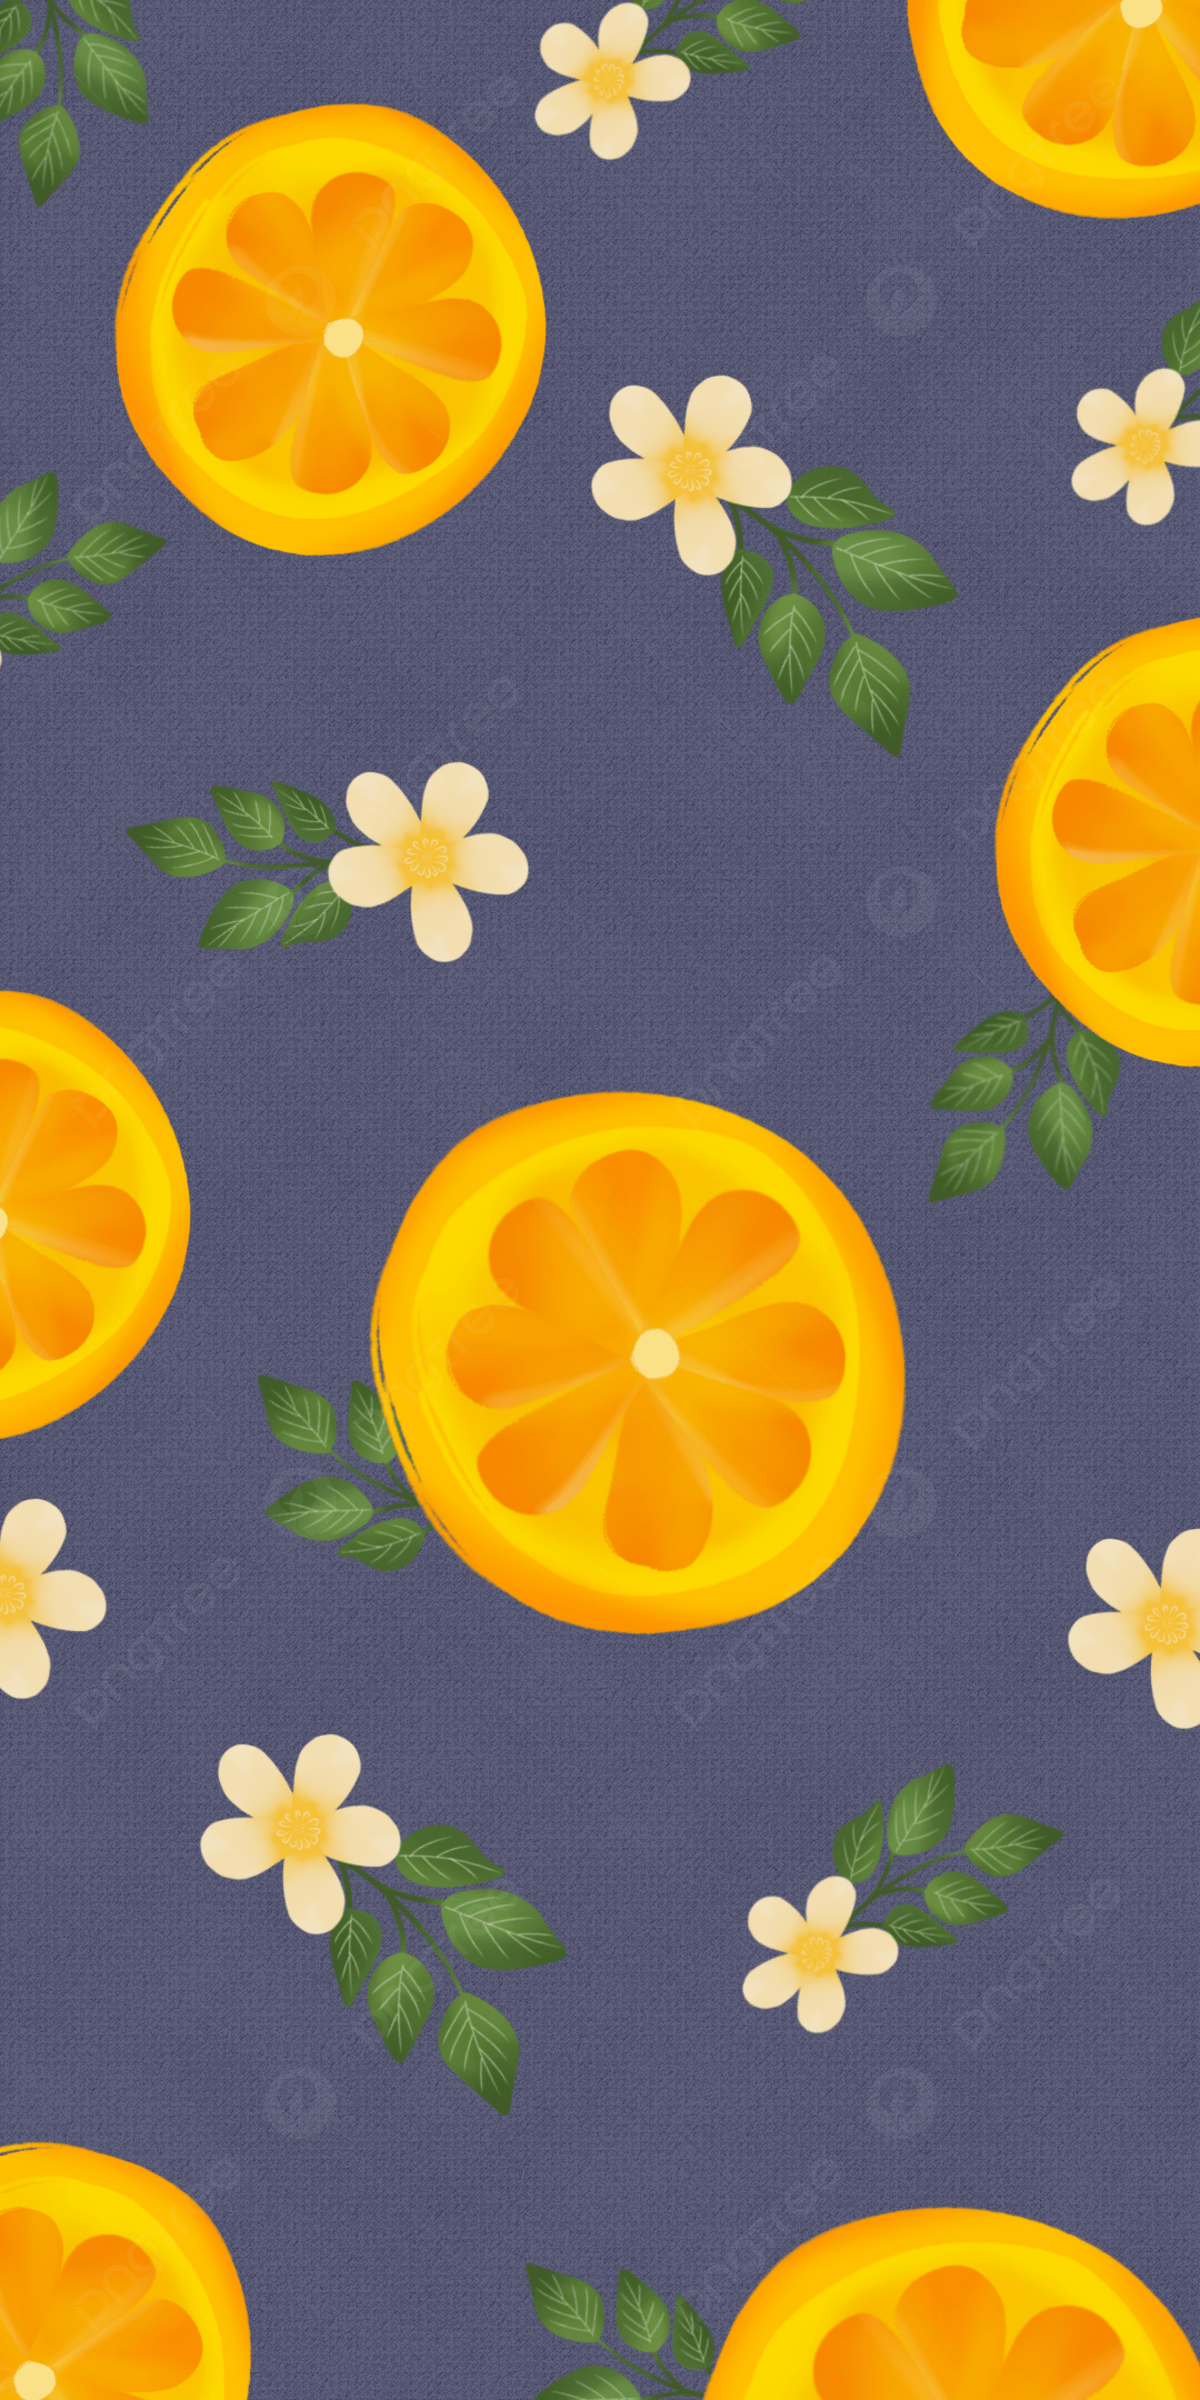 A pattern of orange slices and flowers on blue - Fruit